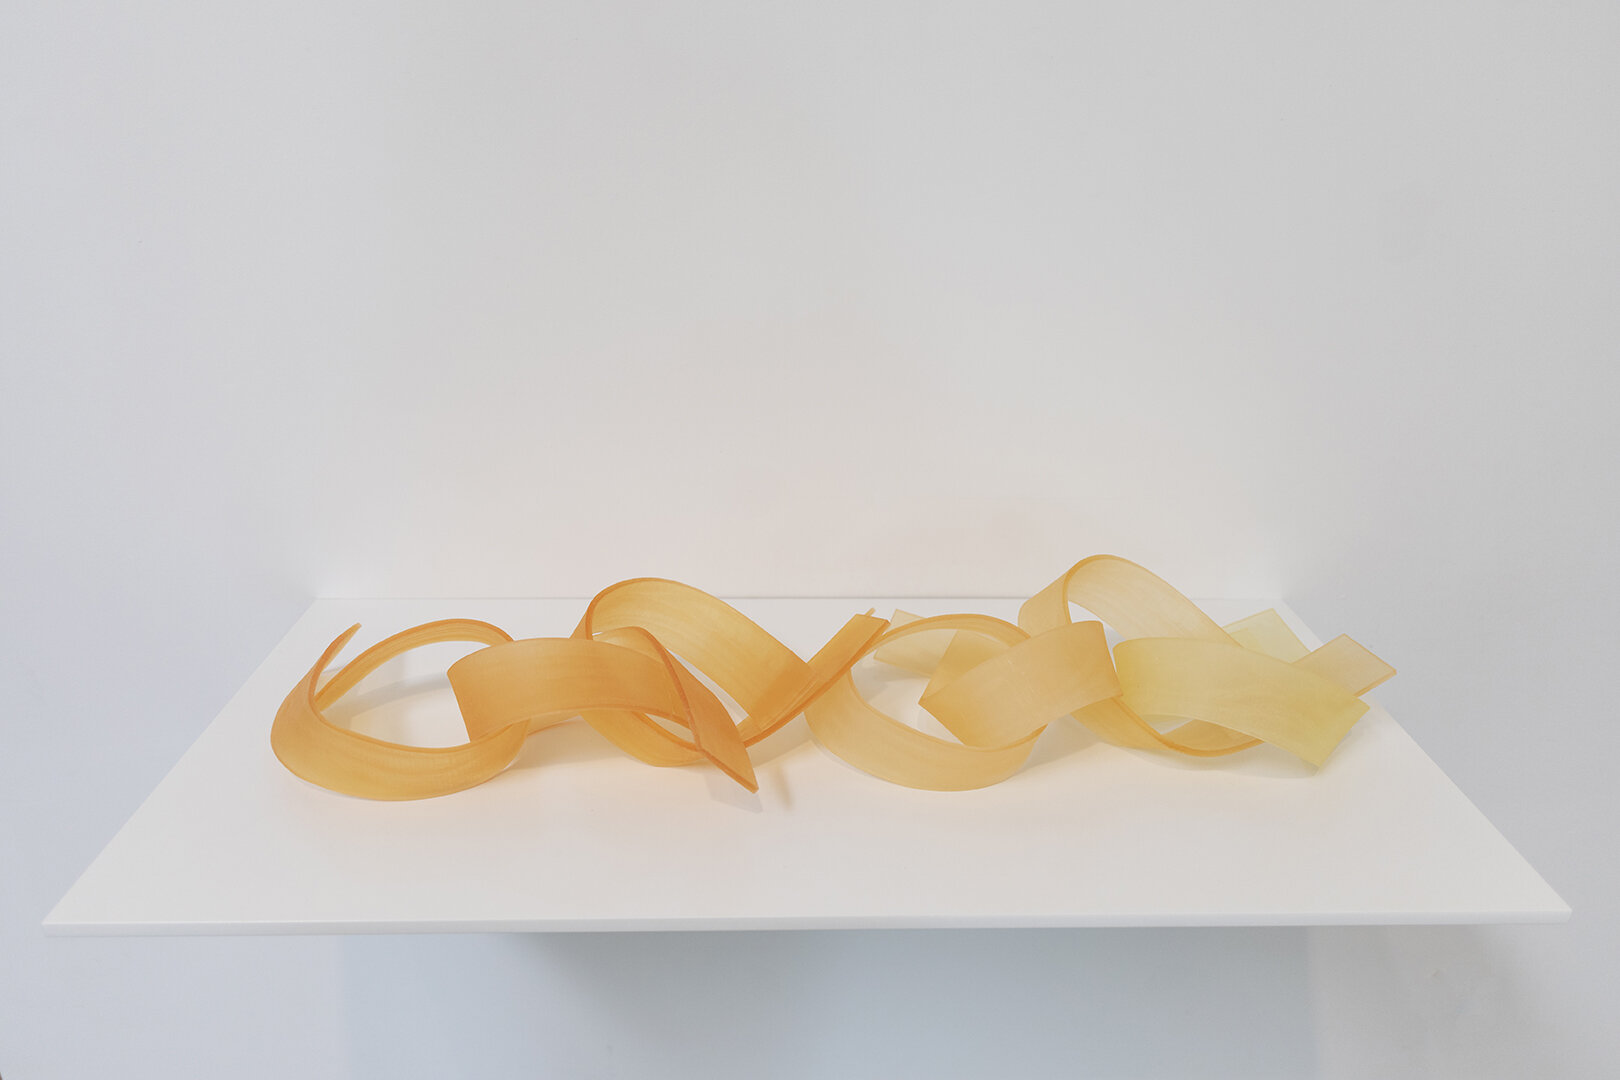 Wave, 2016, Cast Resin, 6 x 27 x 8 inches